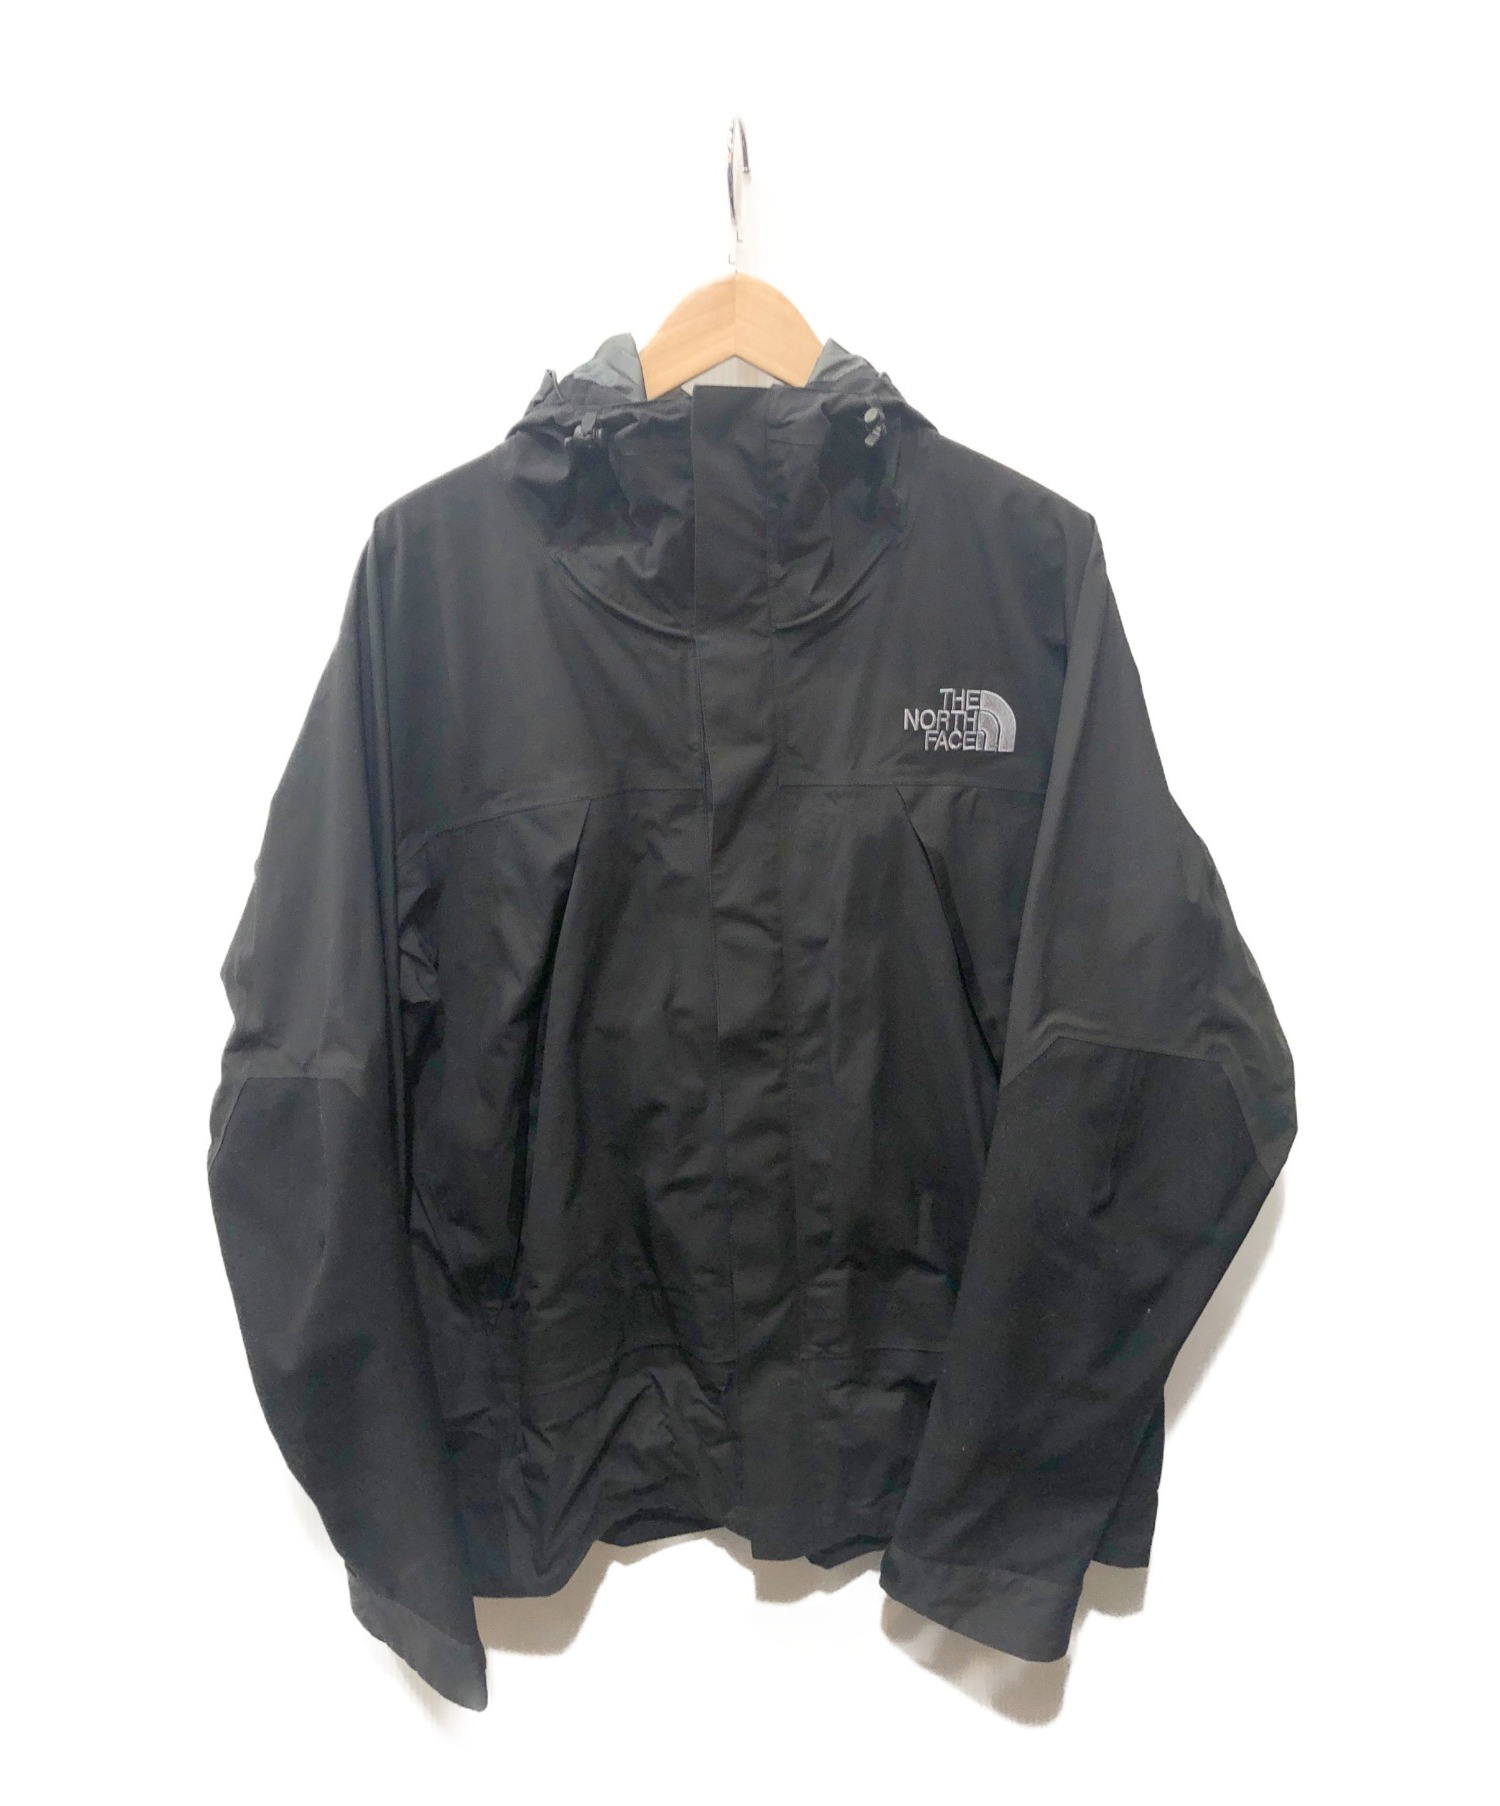 THE NORTH FACE EVERY POINT JACKET XL | www.innoveering.net